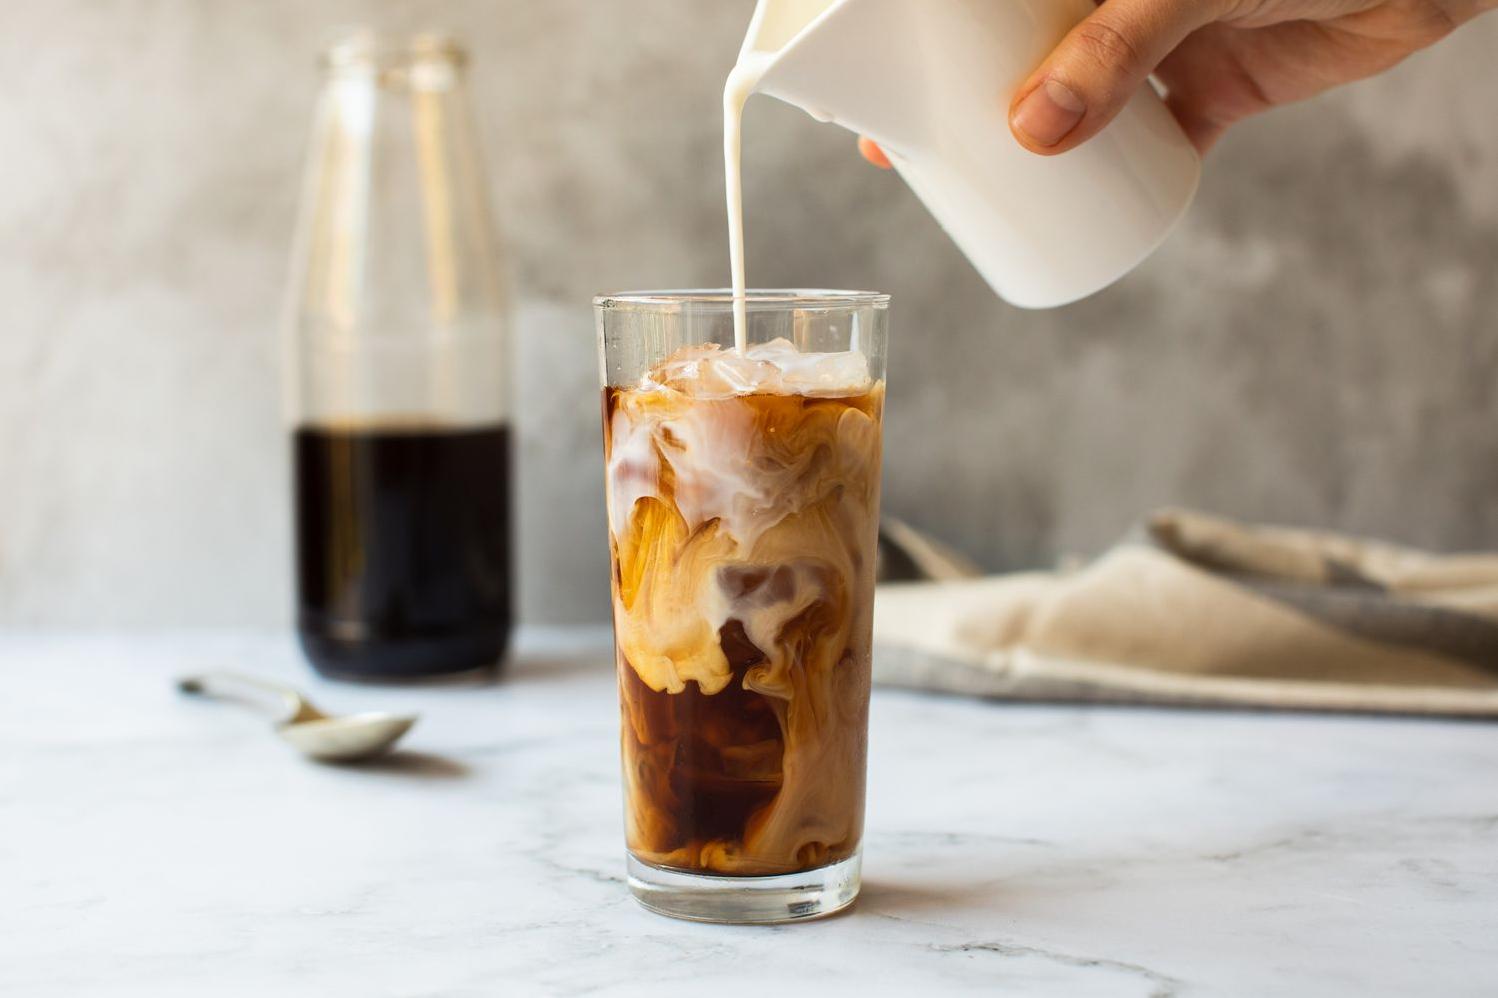  The slow and steady process of cold brew creates a coffee with low acidity and a natural sweetness.